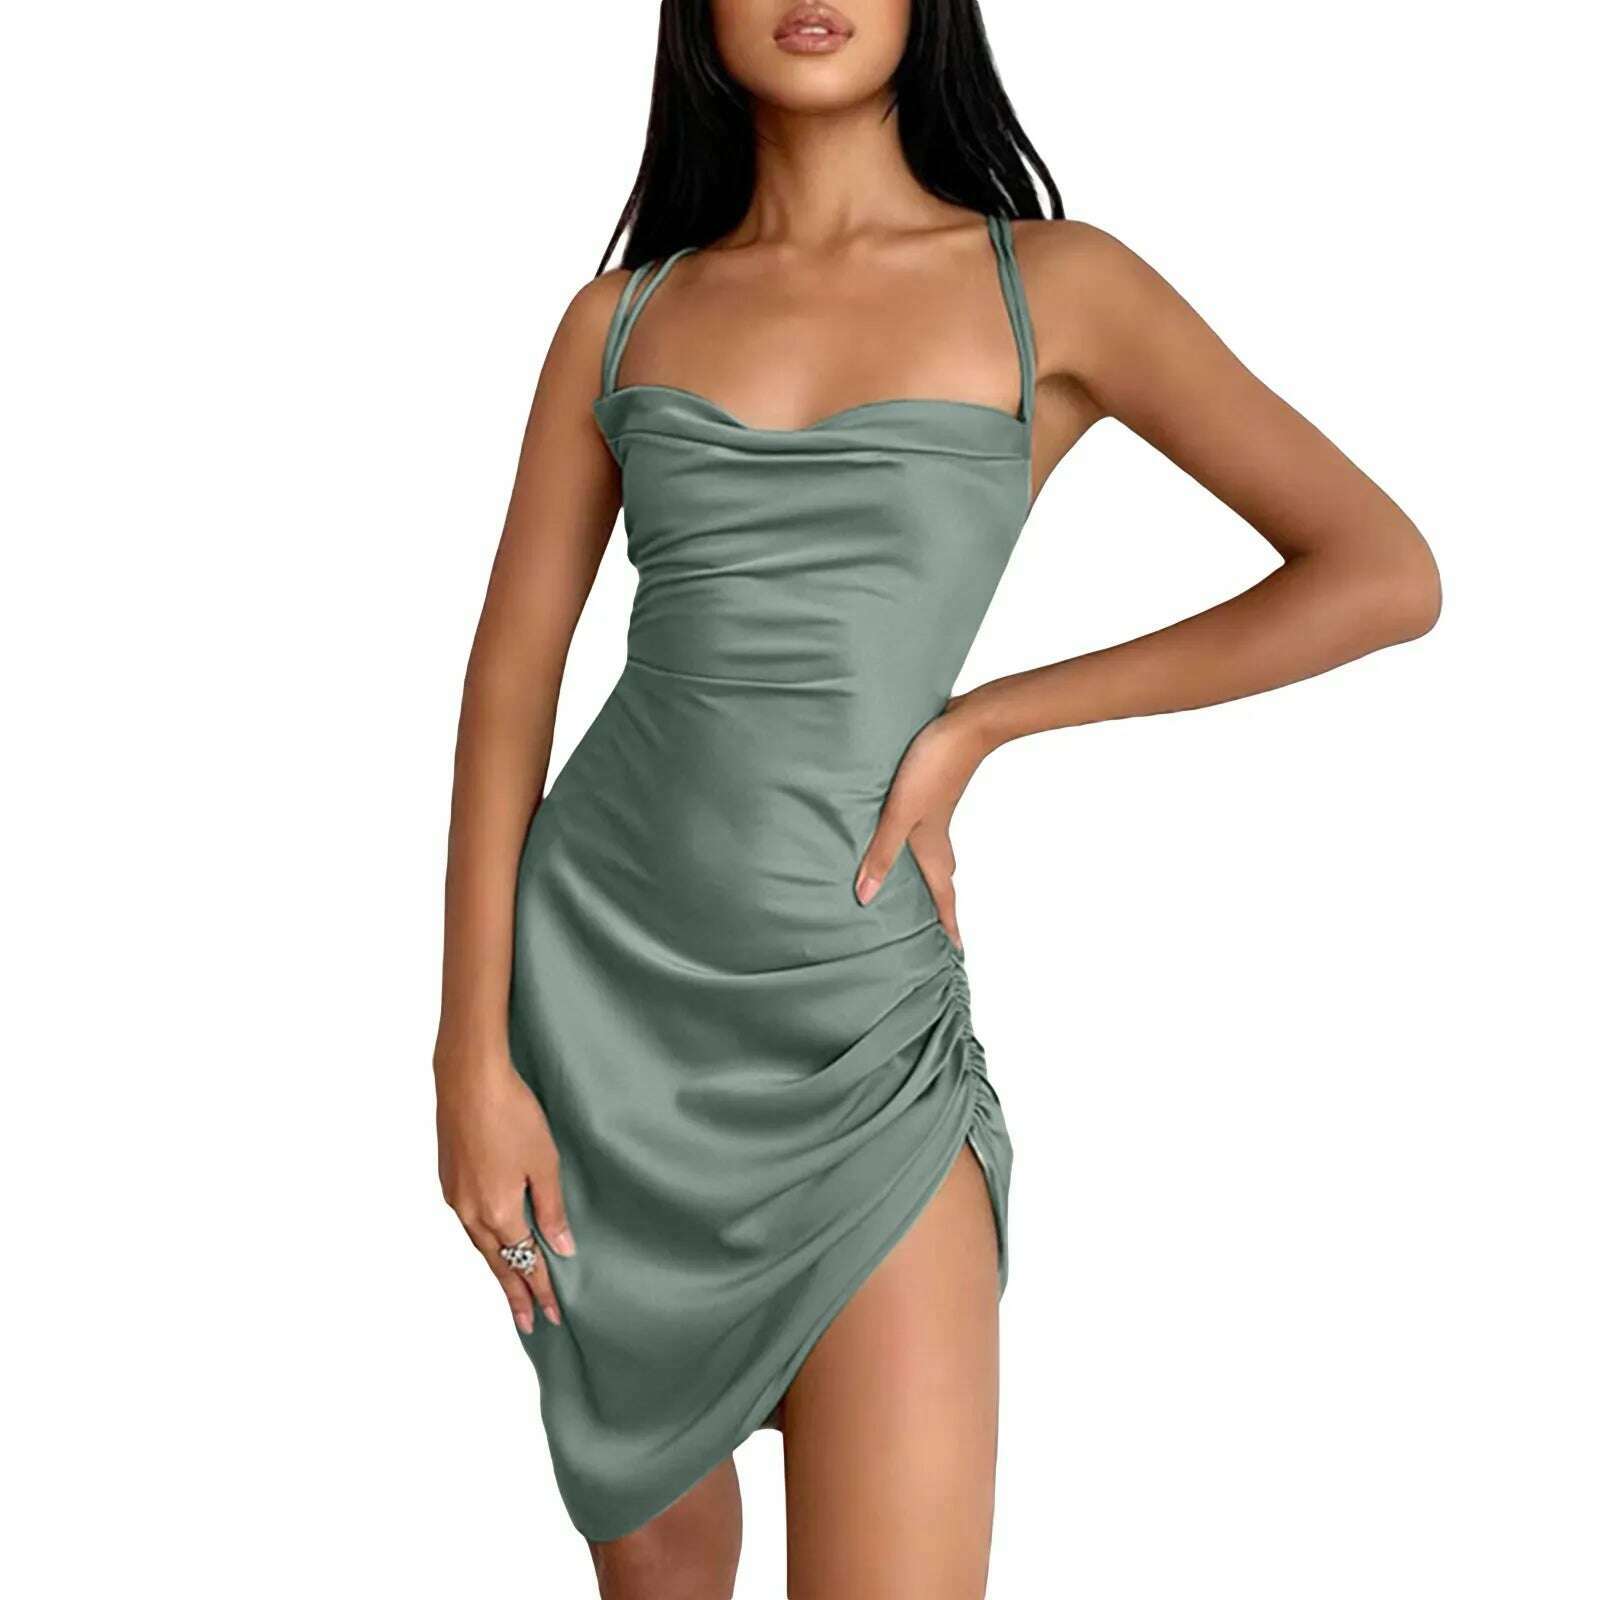 KIMLUD, Close-fitting Skinny Sexy Mini Dress Solid Color Sleeveless Backless Ruched Low-Cut Slim High Waist Chic Stylish Bodycon Dress, army green / S, KIMLUD Women's Clothes